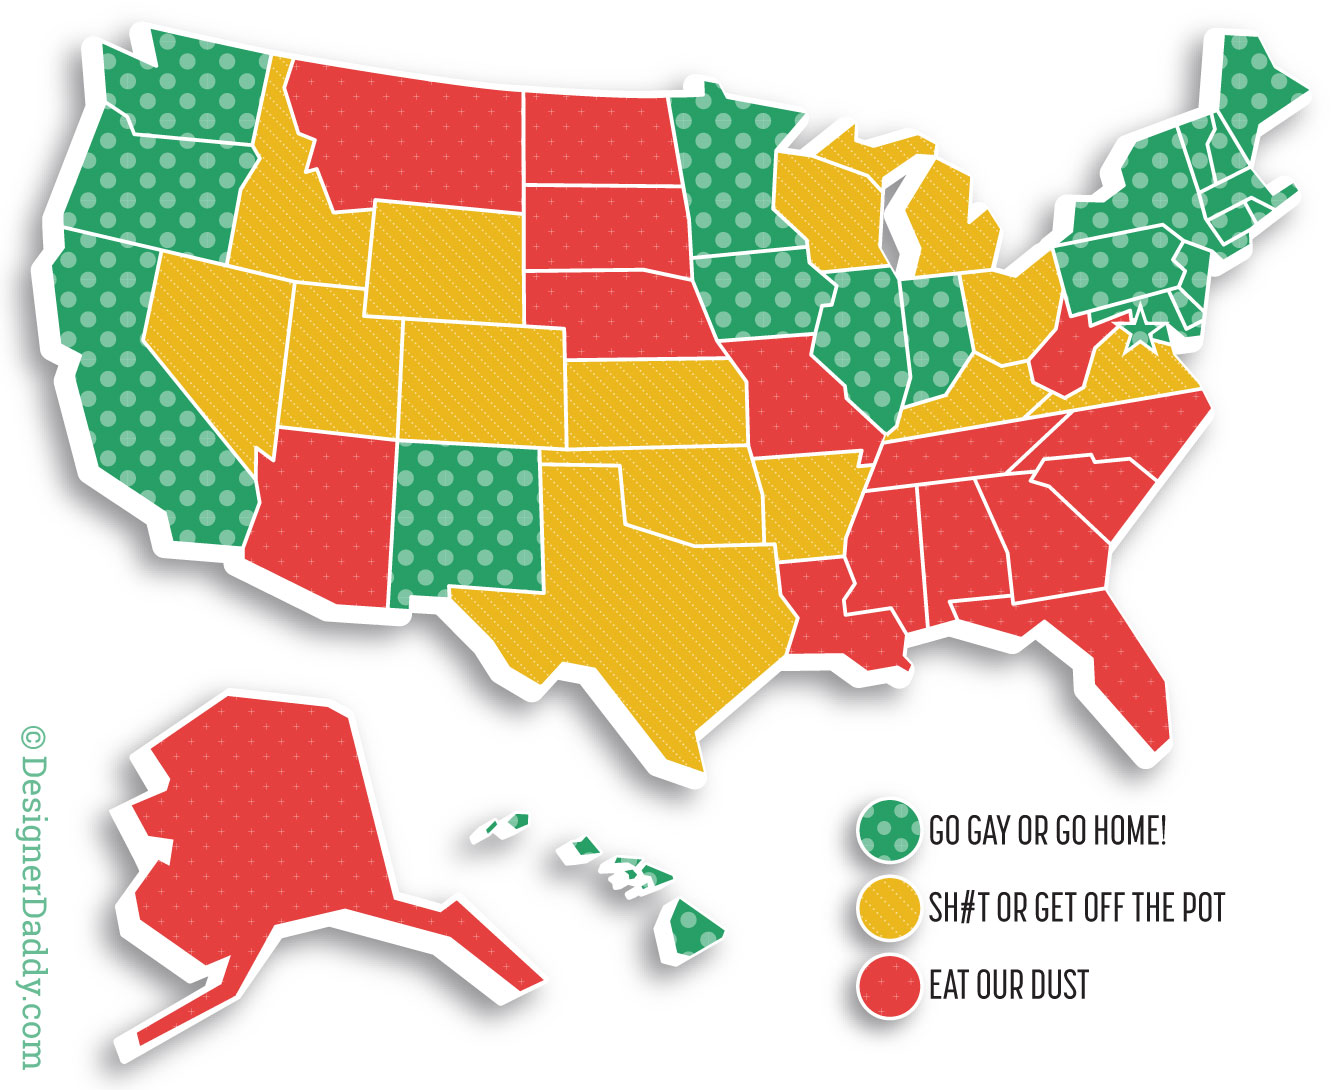 same-sex marriage map of the united states